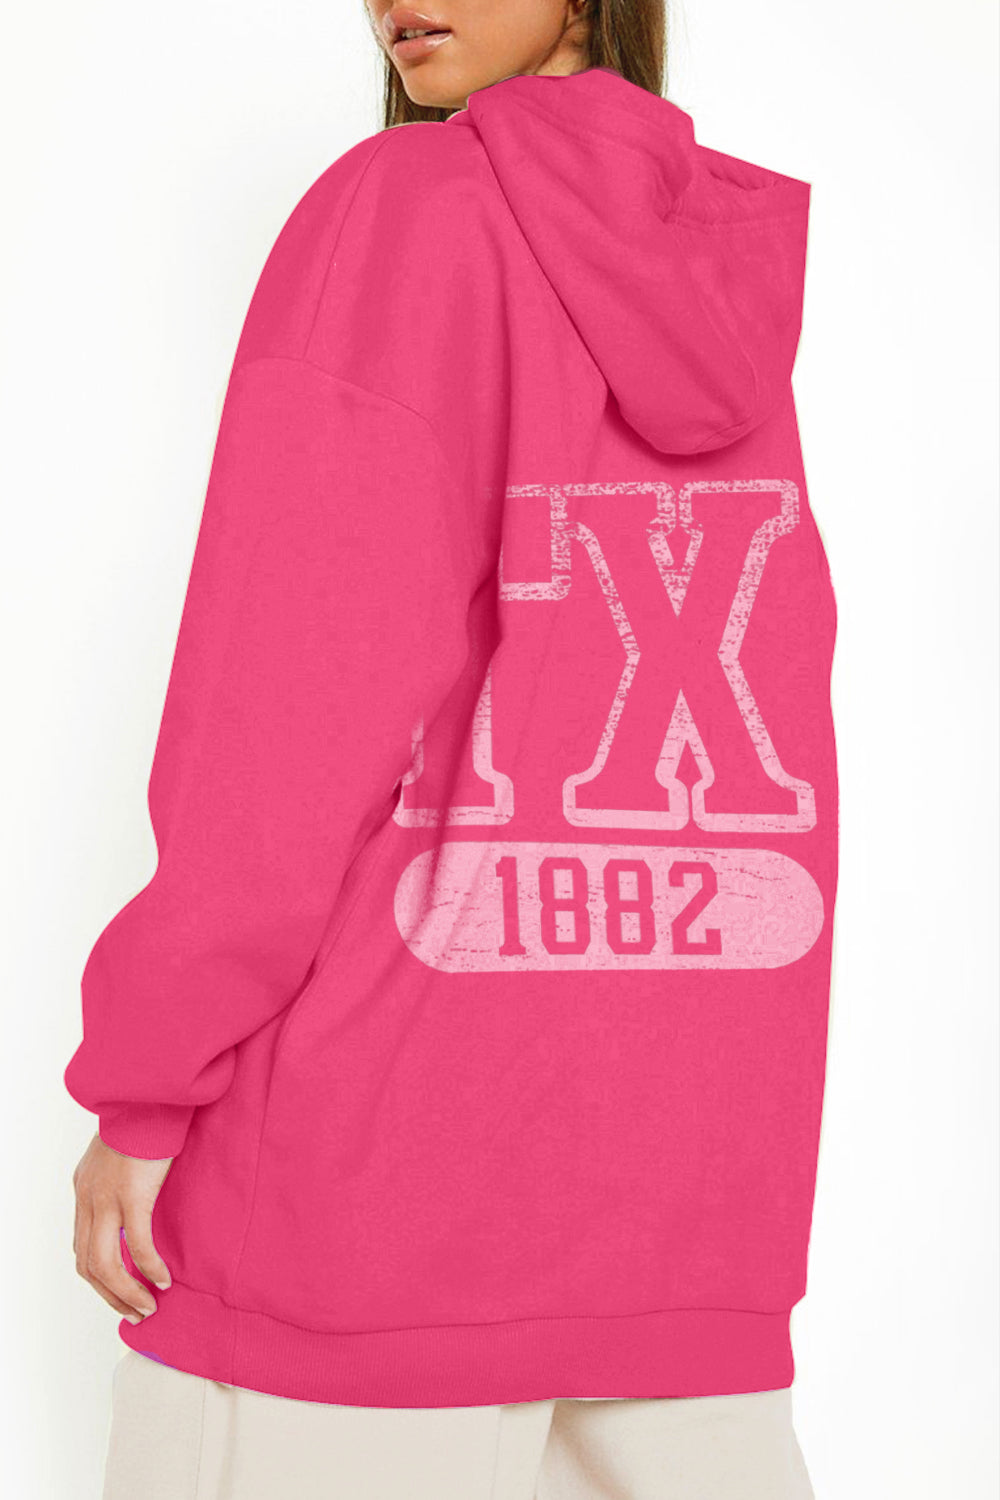 Full Size TX 1882 Graphic Hoodie - Women’s Clothing & Accessories - Shirts & Tops - 7 - 2024